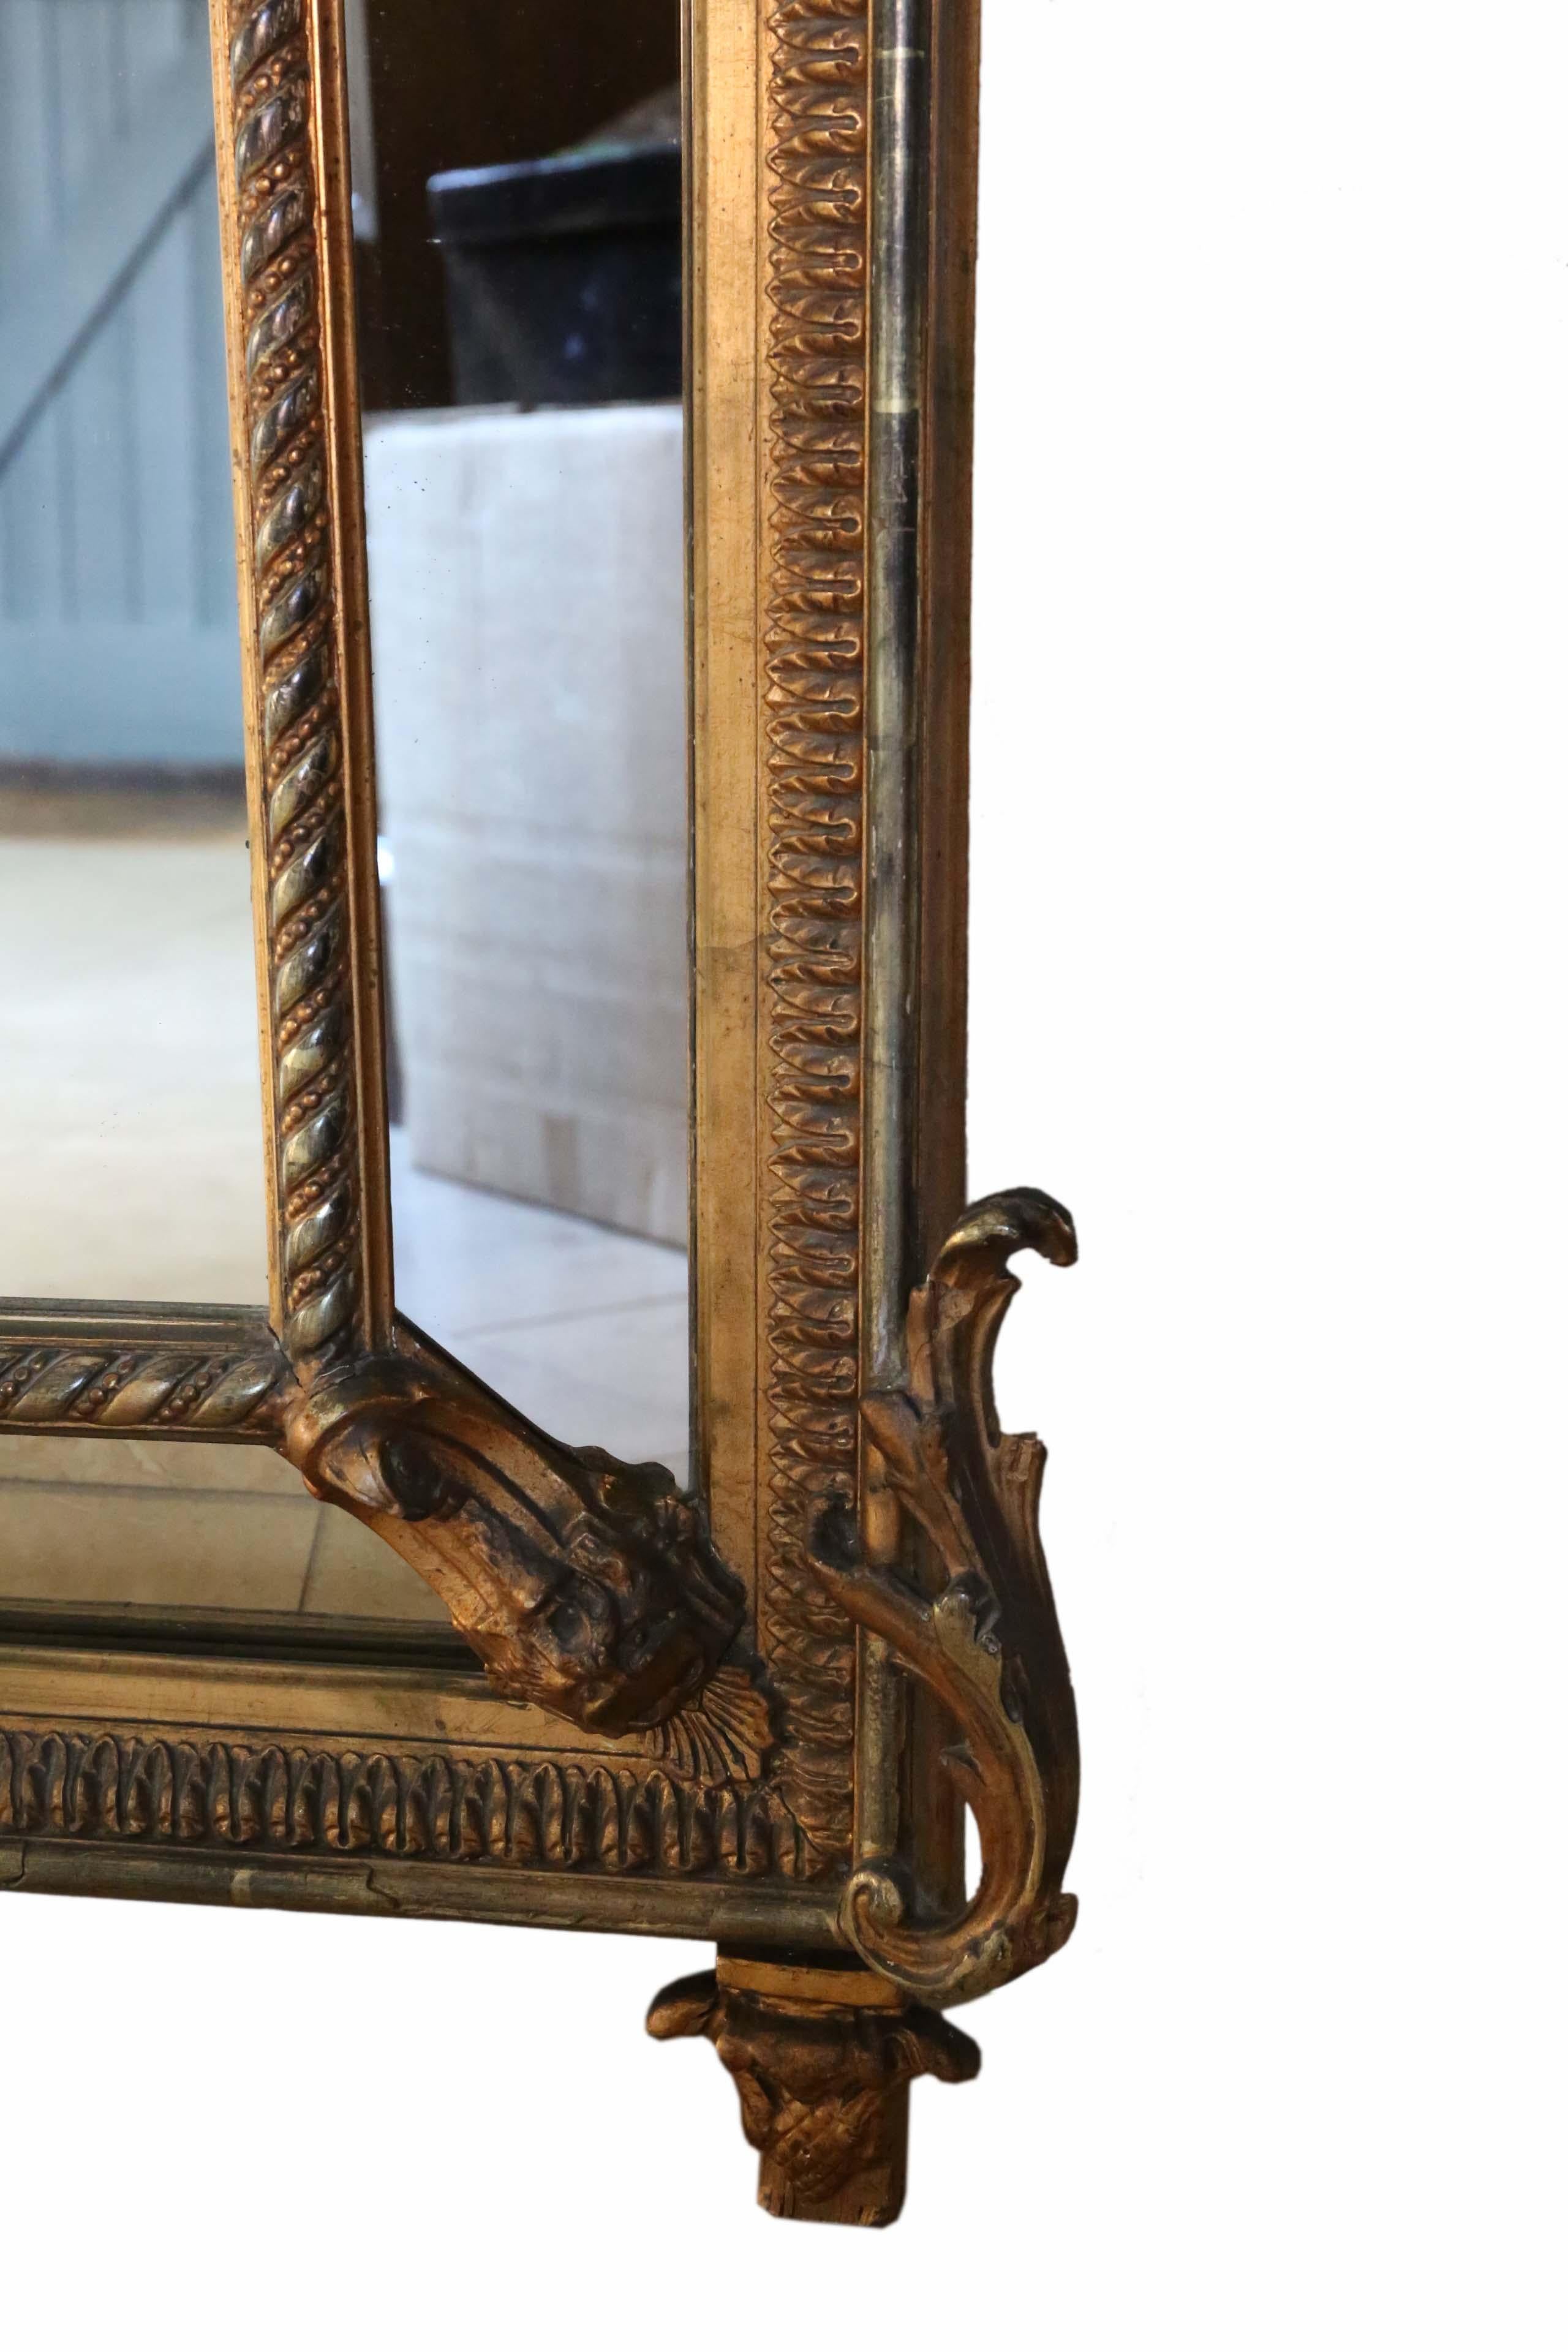 Antique 19th Century Gilt Wall Cushion Mirror Very Large Fine Quality 2